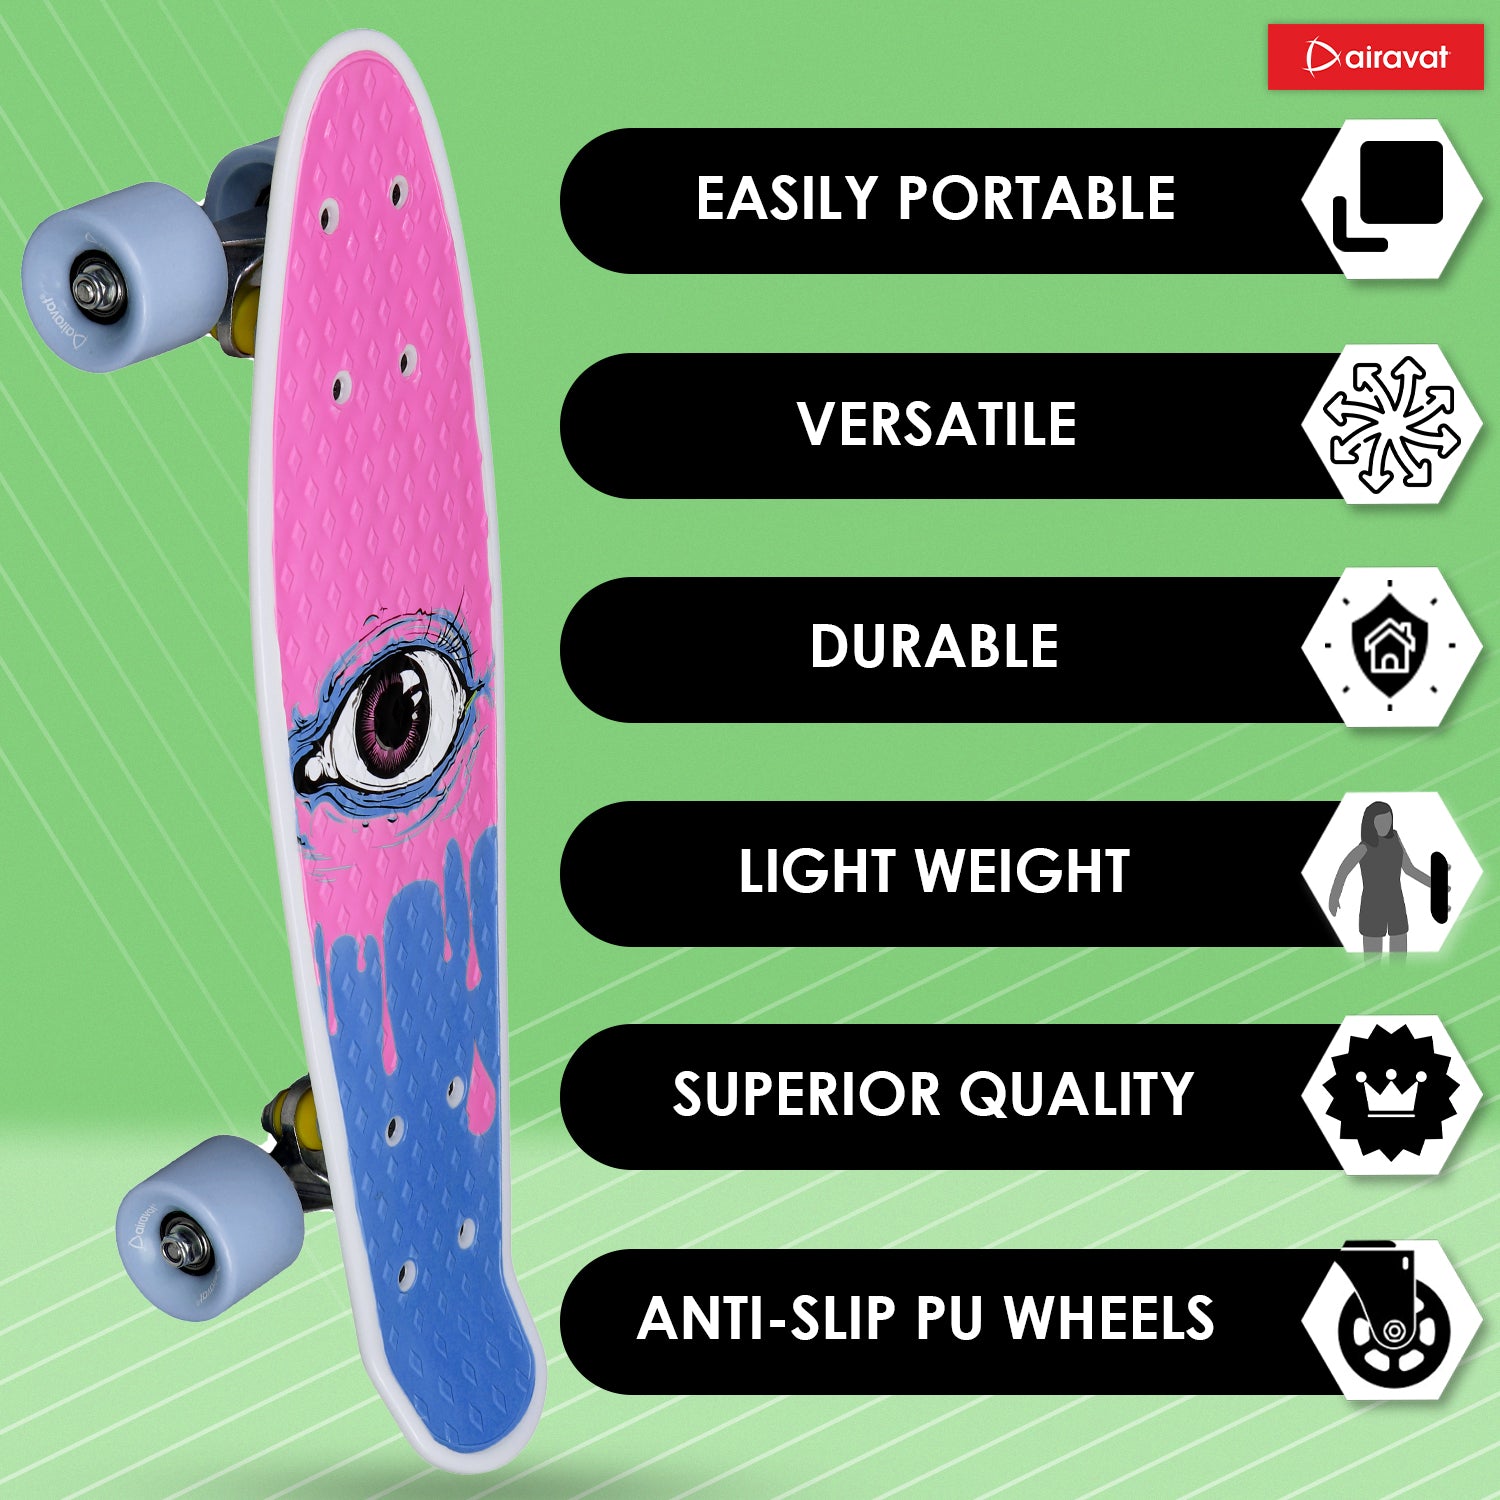 7811-skateboard-style-4-more-features